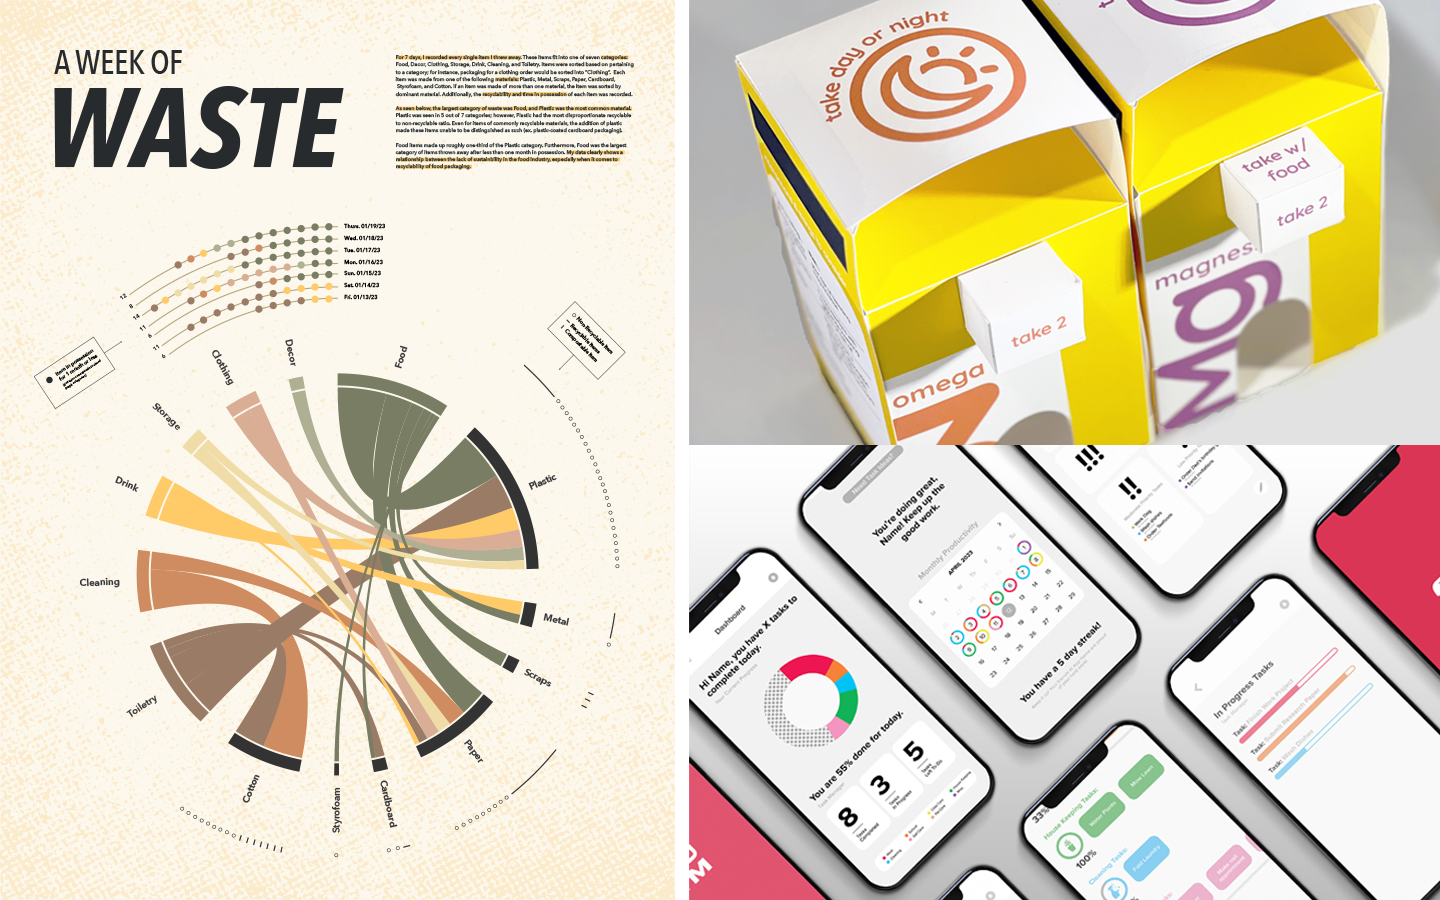 Info design applications in prints, packaging, and digital dashboard